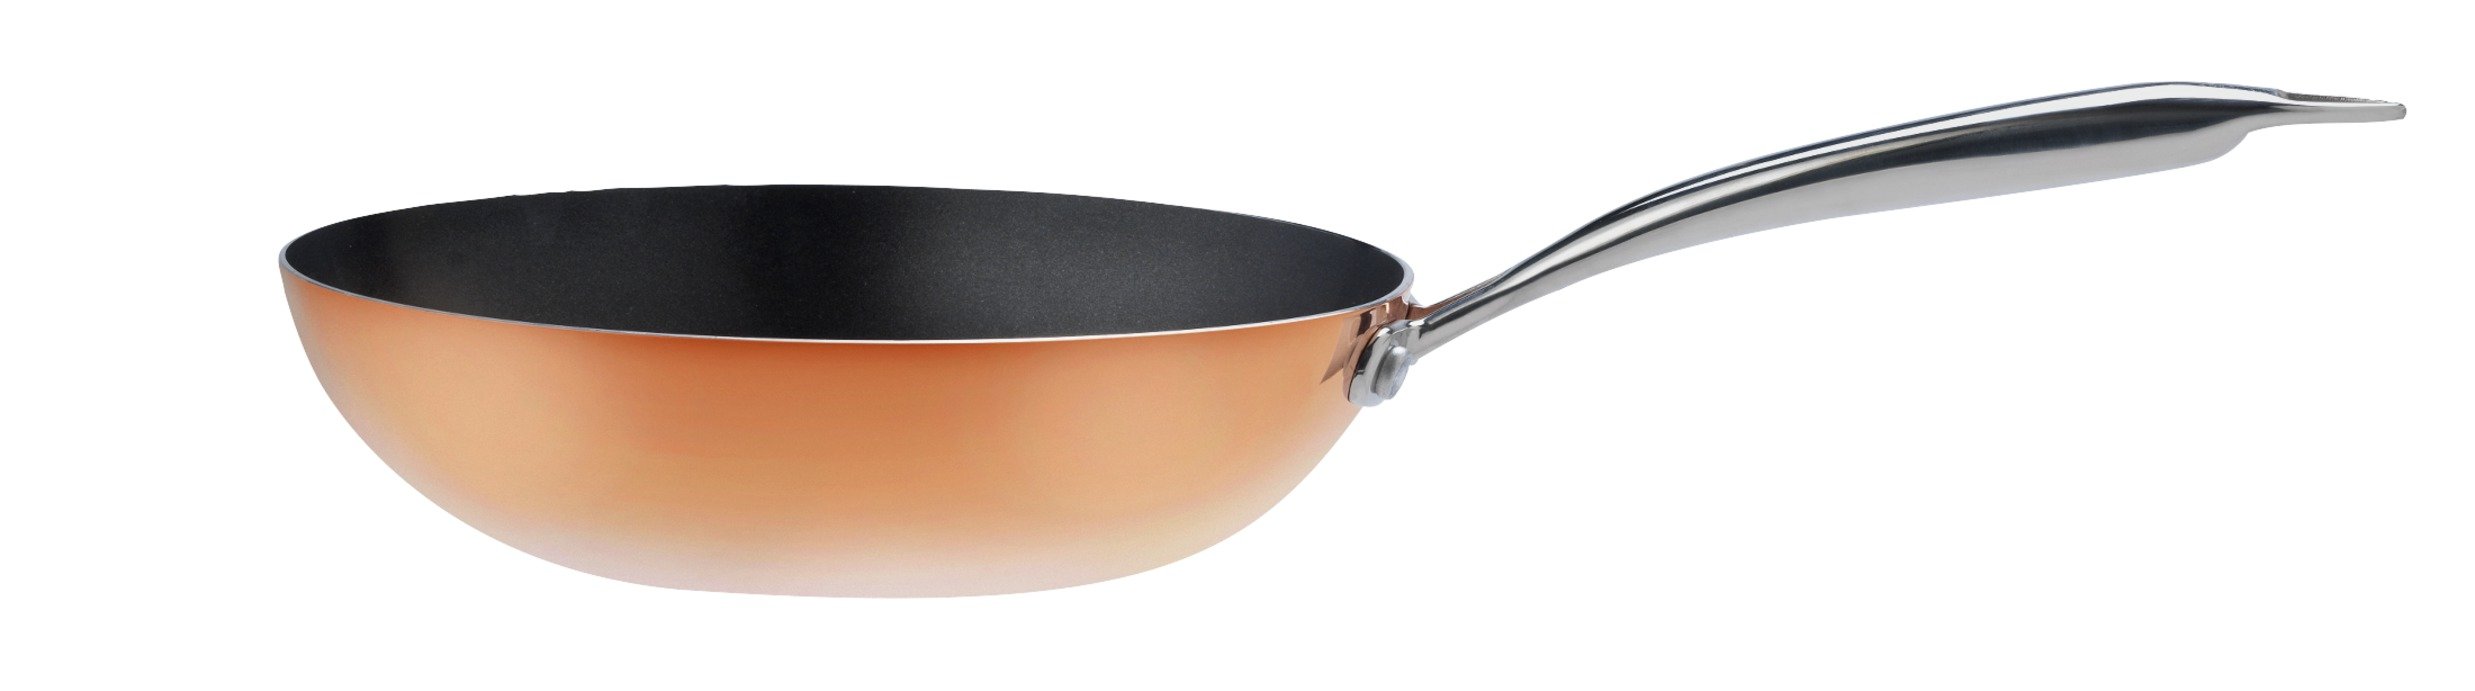 Sainsbury's Home Cooks Collection 24cm Copper Frying Pan